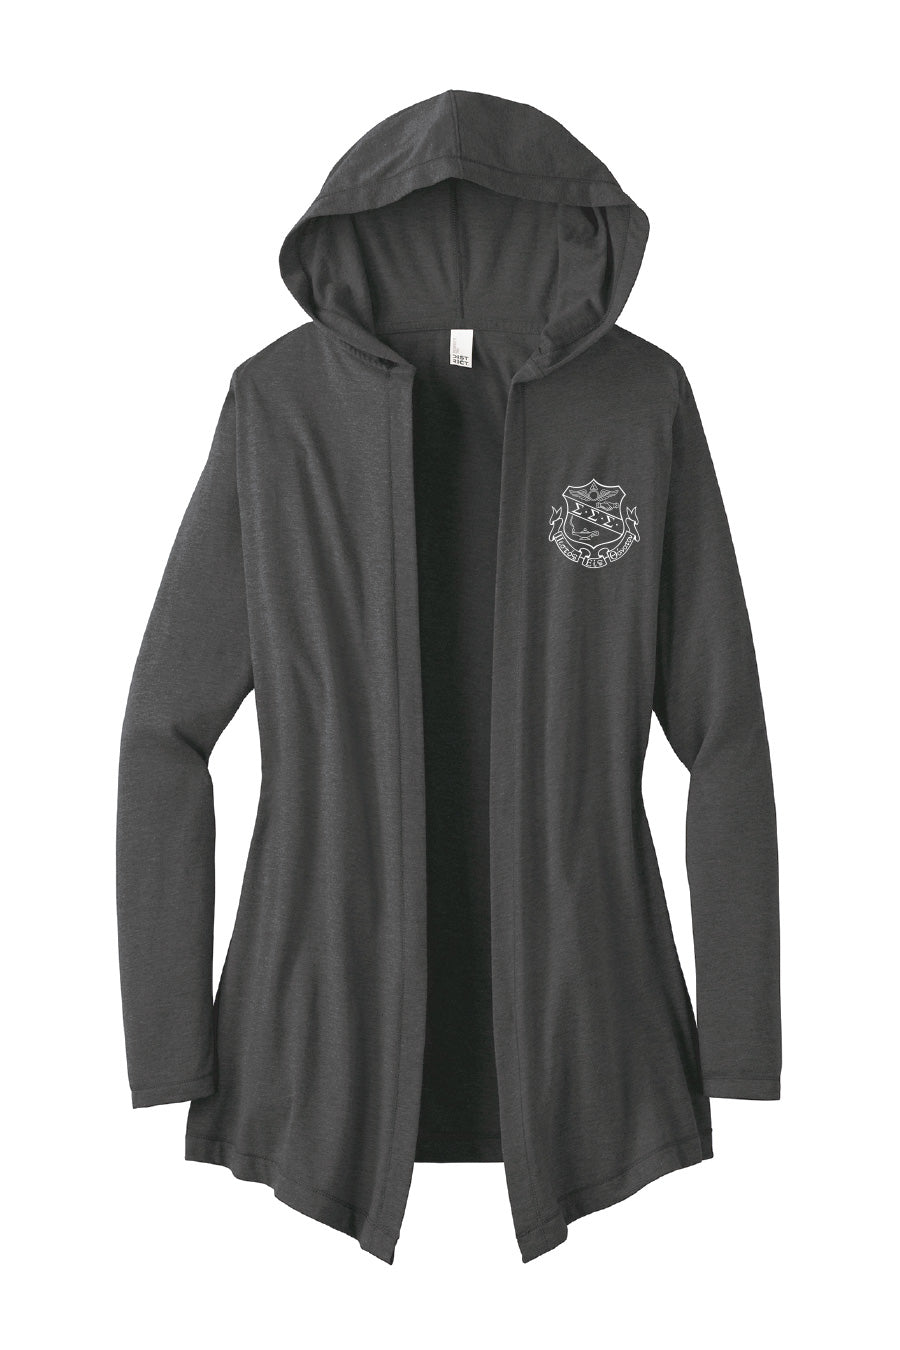 Coat of Arms Hooded Cardigan